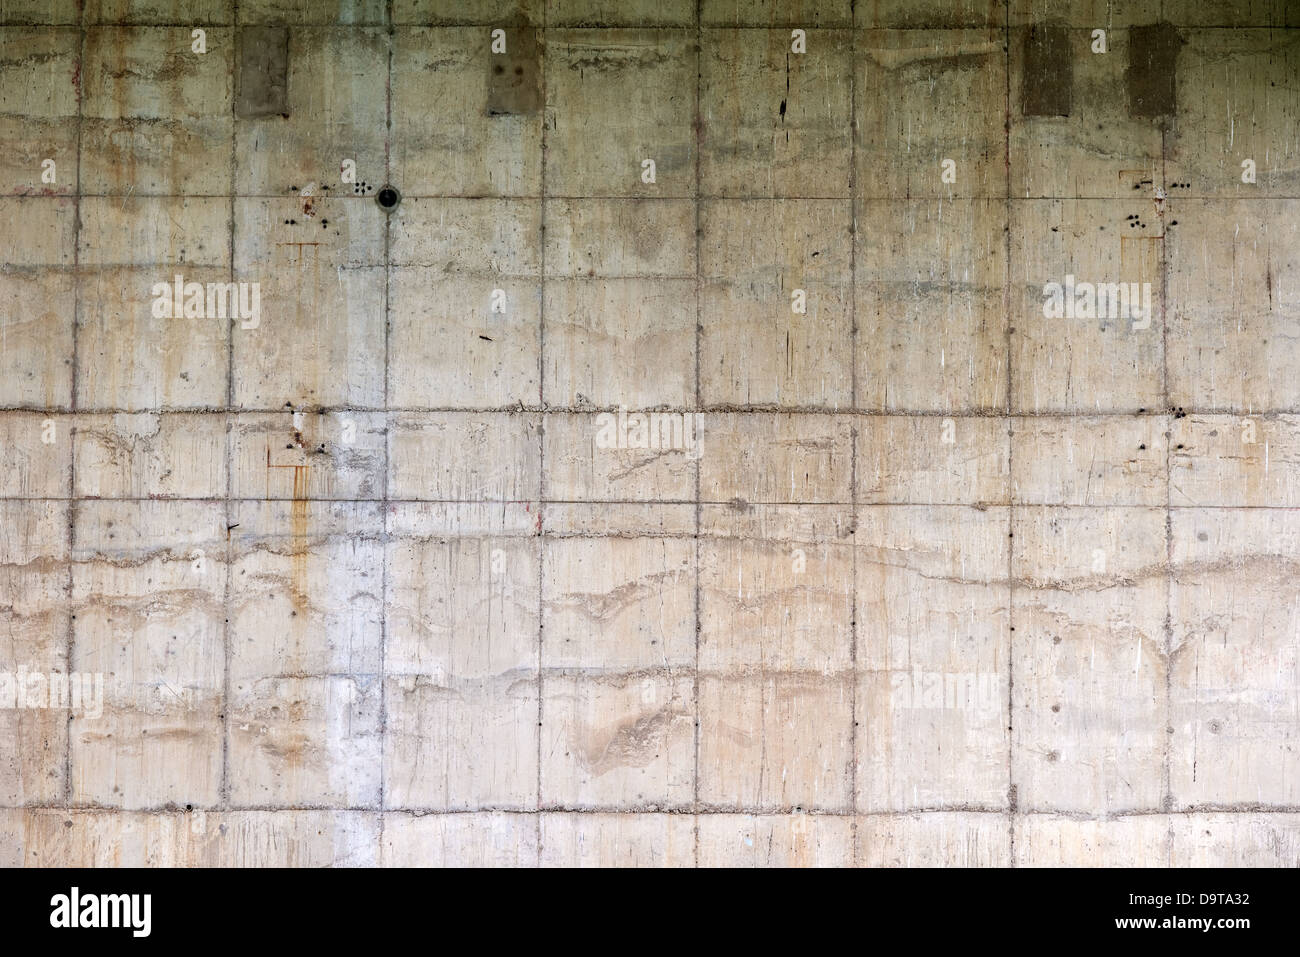 Old grunge obsolete wall, background texture image Stock Photo